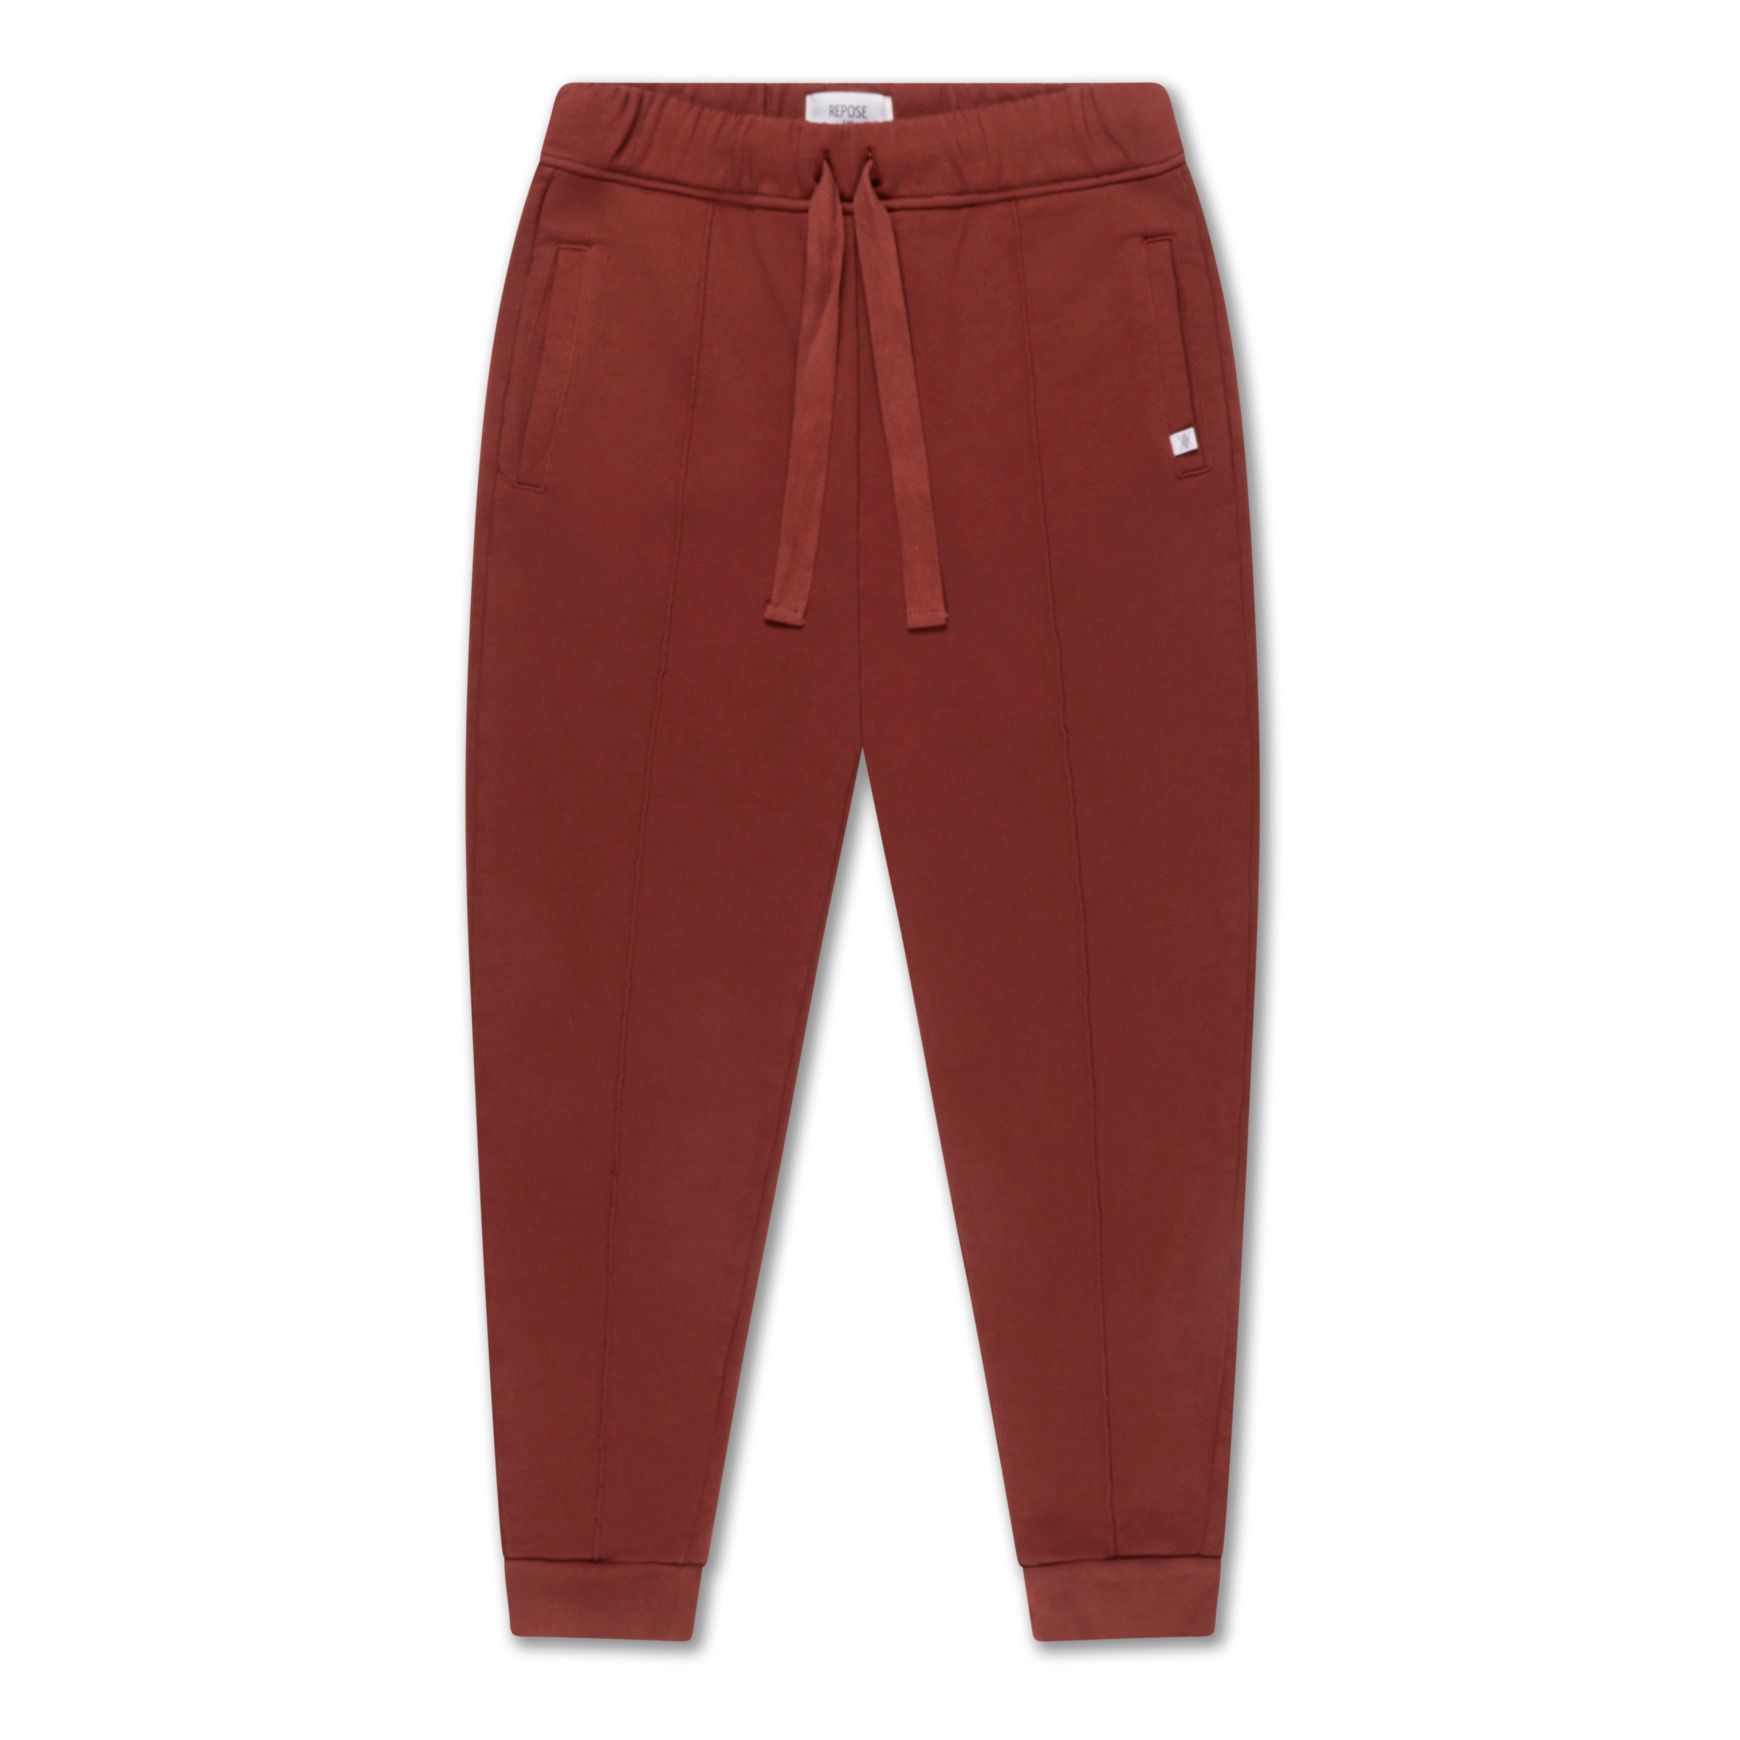 Bobo Choses Woman Flower Jogger Pants Burgundy Red - Advice from a